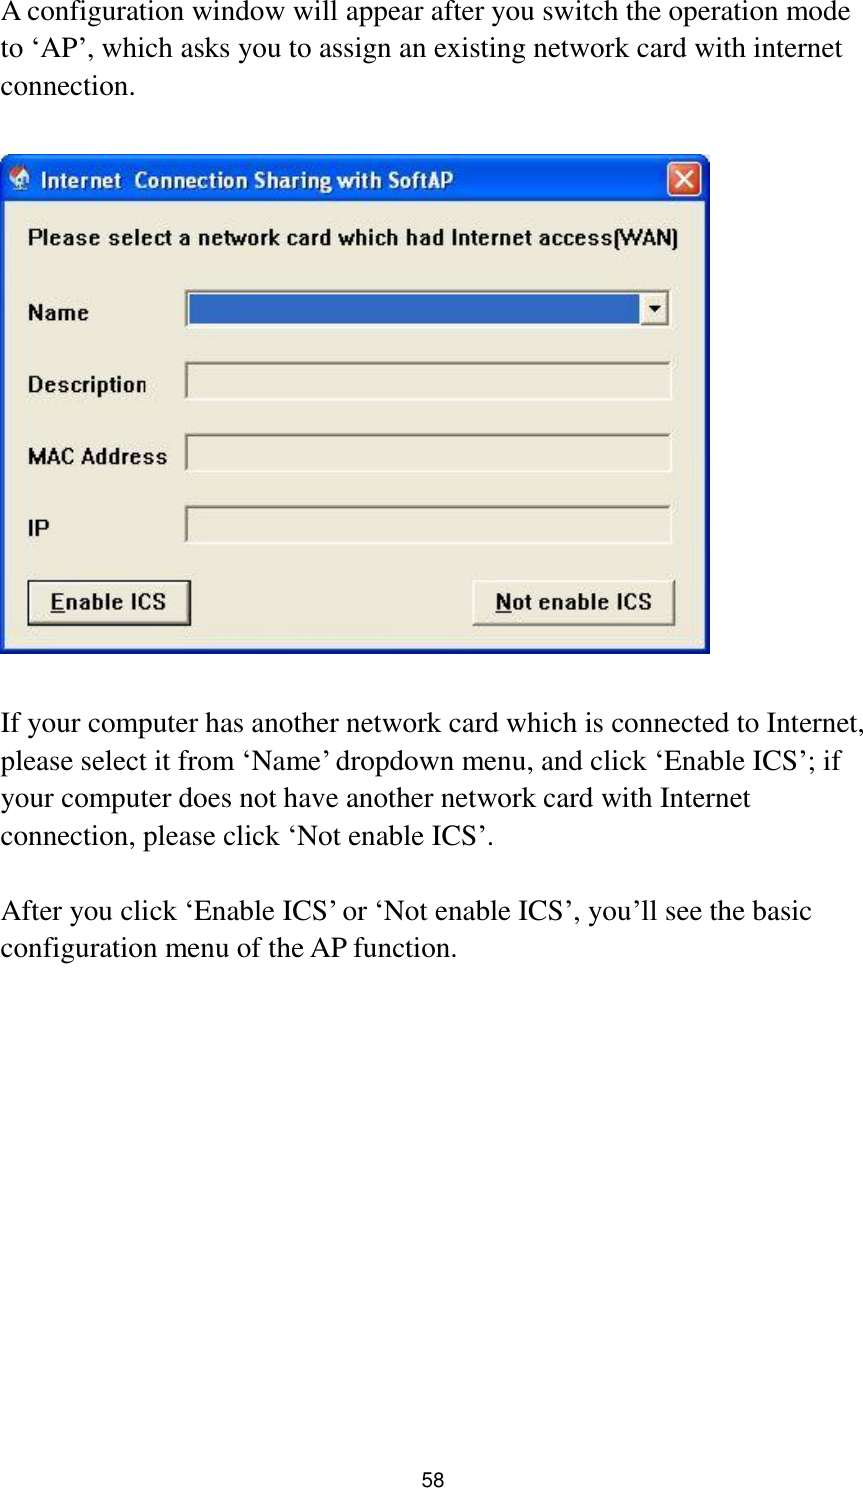  58 A configuration window will appear after you switch the operation mode to „AP‟, which asks you to assign an existing network card with internet connection.    If your computer has another network card which is connected to Internet, please select it from „Name‟ dropdown menu, and click „Enable ICS‟; if your computer does not have another network card with Internet connection, please click „Not enable ICS‟.      After you click „Enable ICS‟ or „Not enable ICS‟, you‟ll see the basic configuration menu of the AP function.  